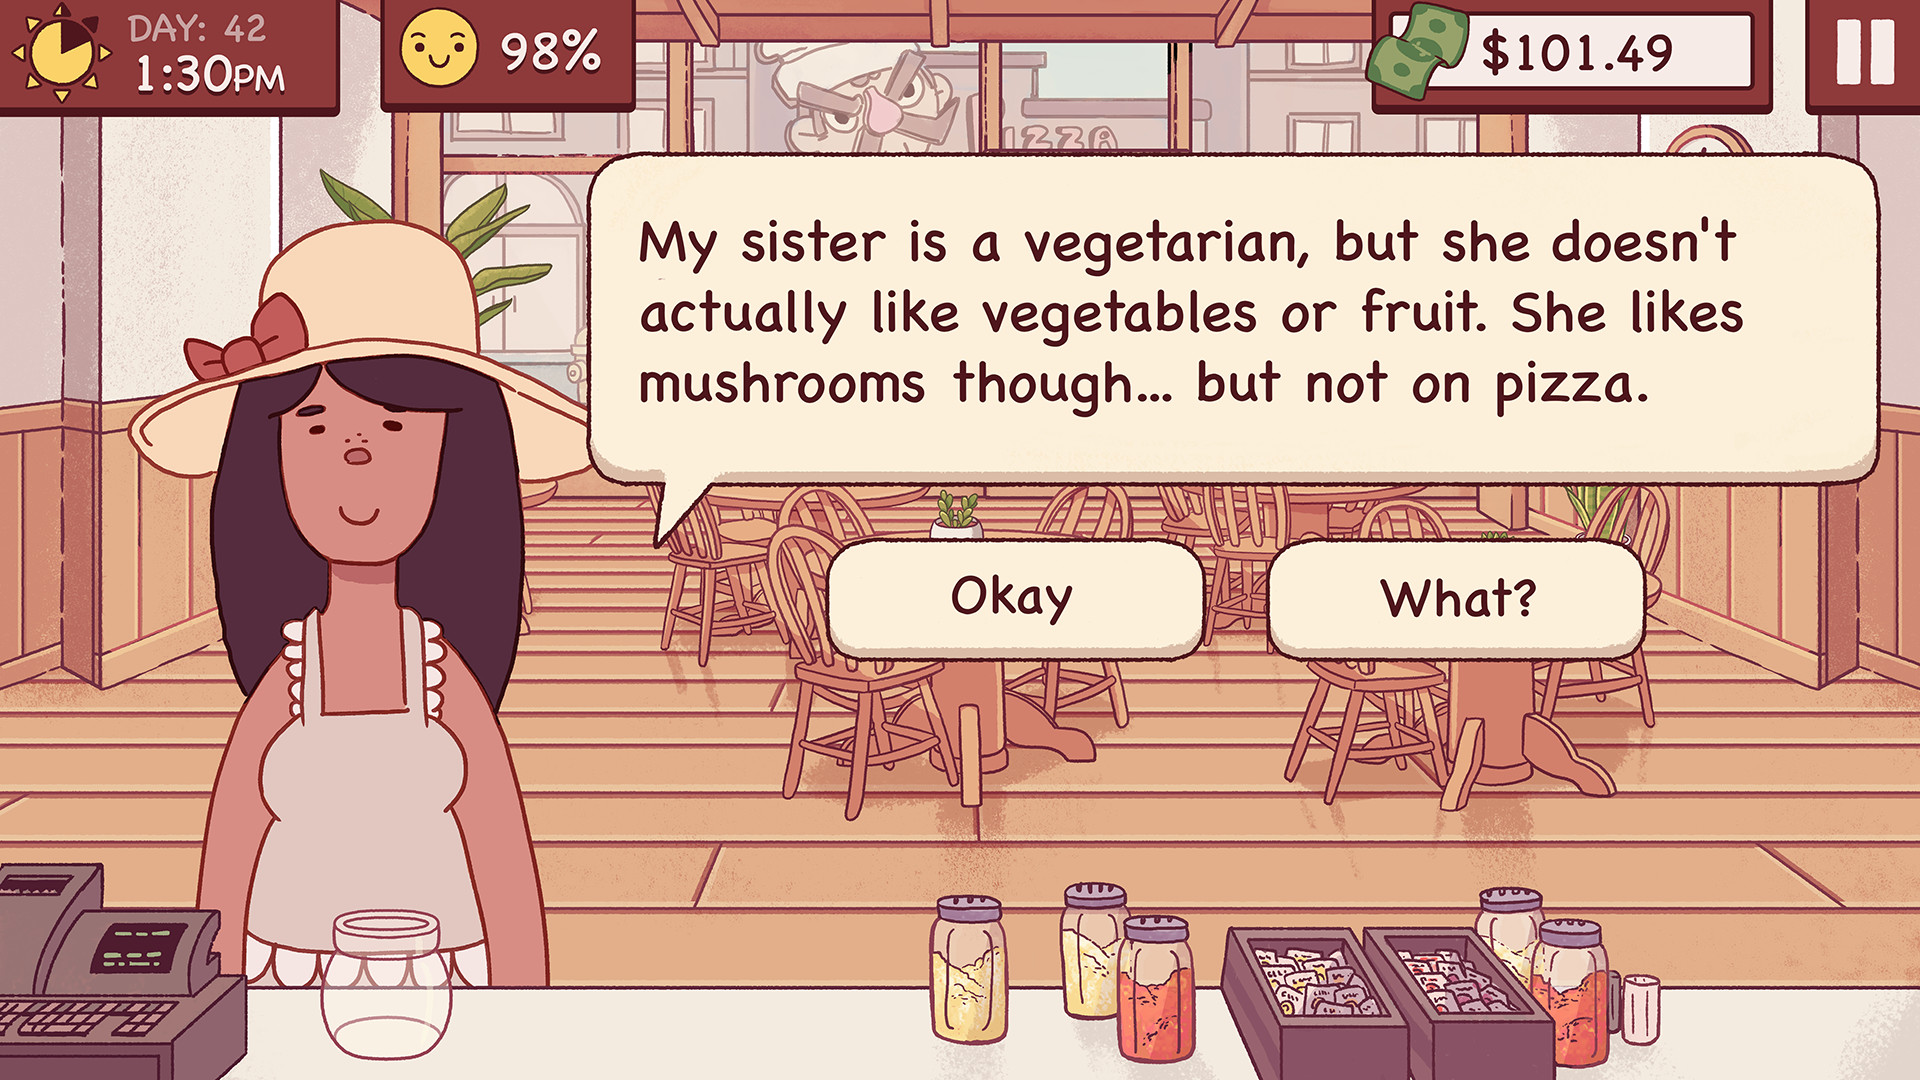 Trochoiviet Introduced Pizza Making Online Games to Its Cooking